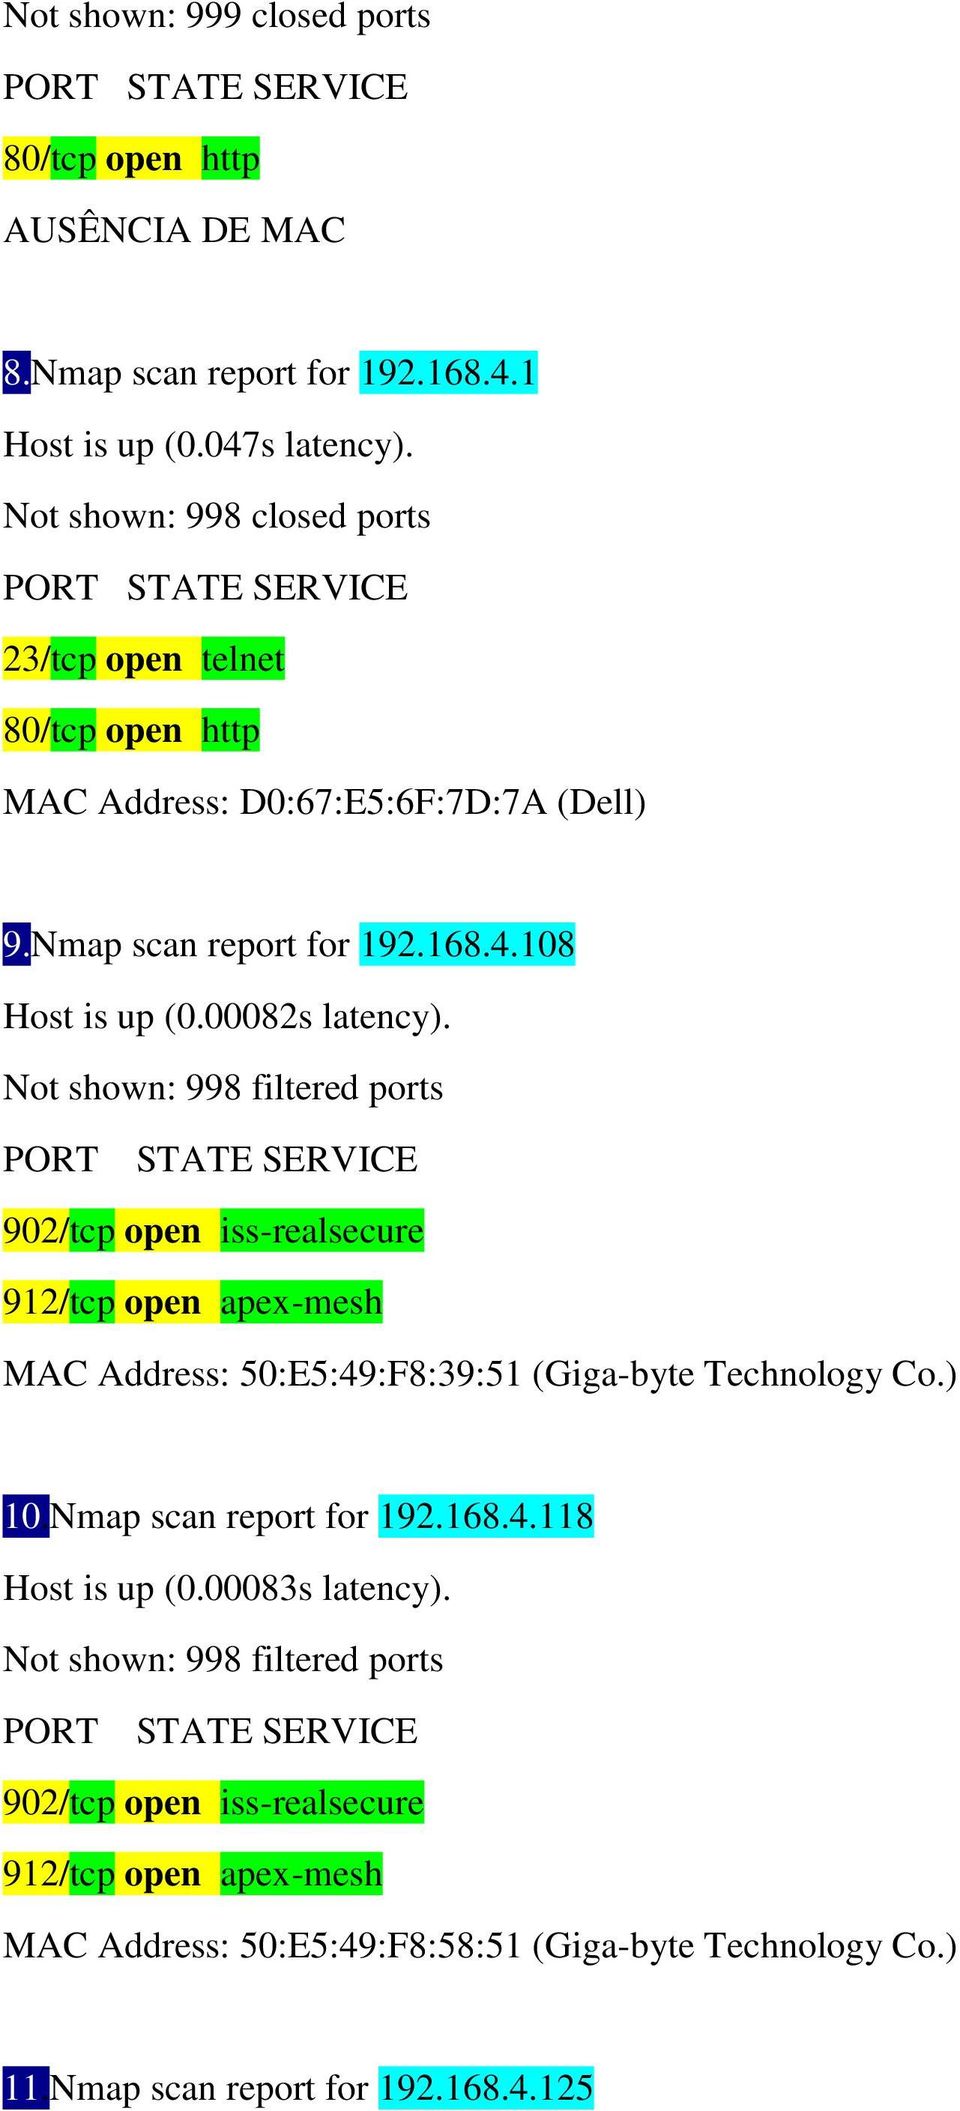 Not shown: 998 filtered ports PORT STATE SERVICE 902/tcp open iss-realsecure 912/tcp open apex-mesh MAC Address: 50:E5:49:F8:39:51 (Giga-byte Technology Co.) 10.Nmap scan report for 192.